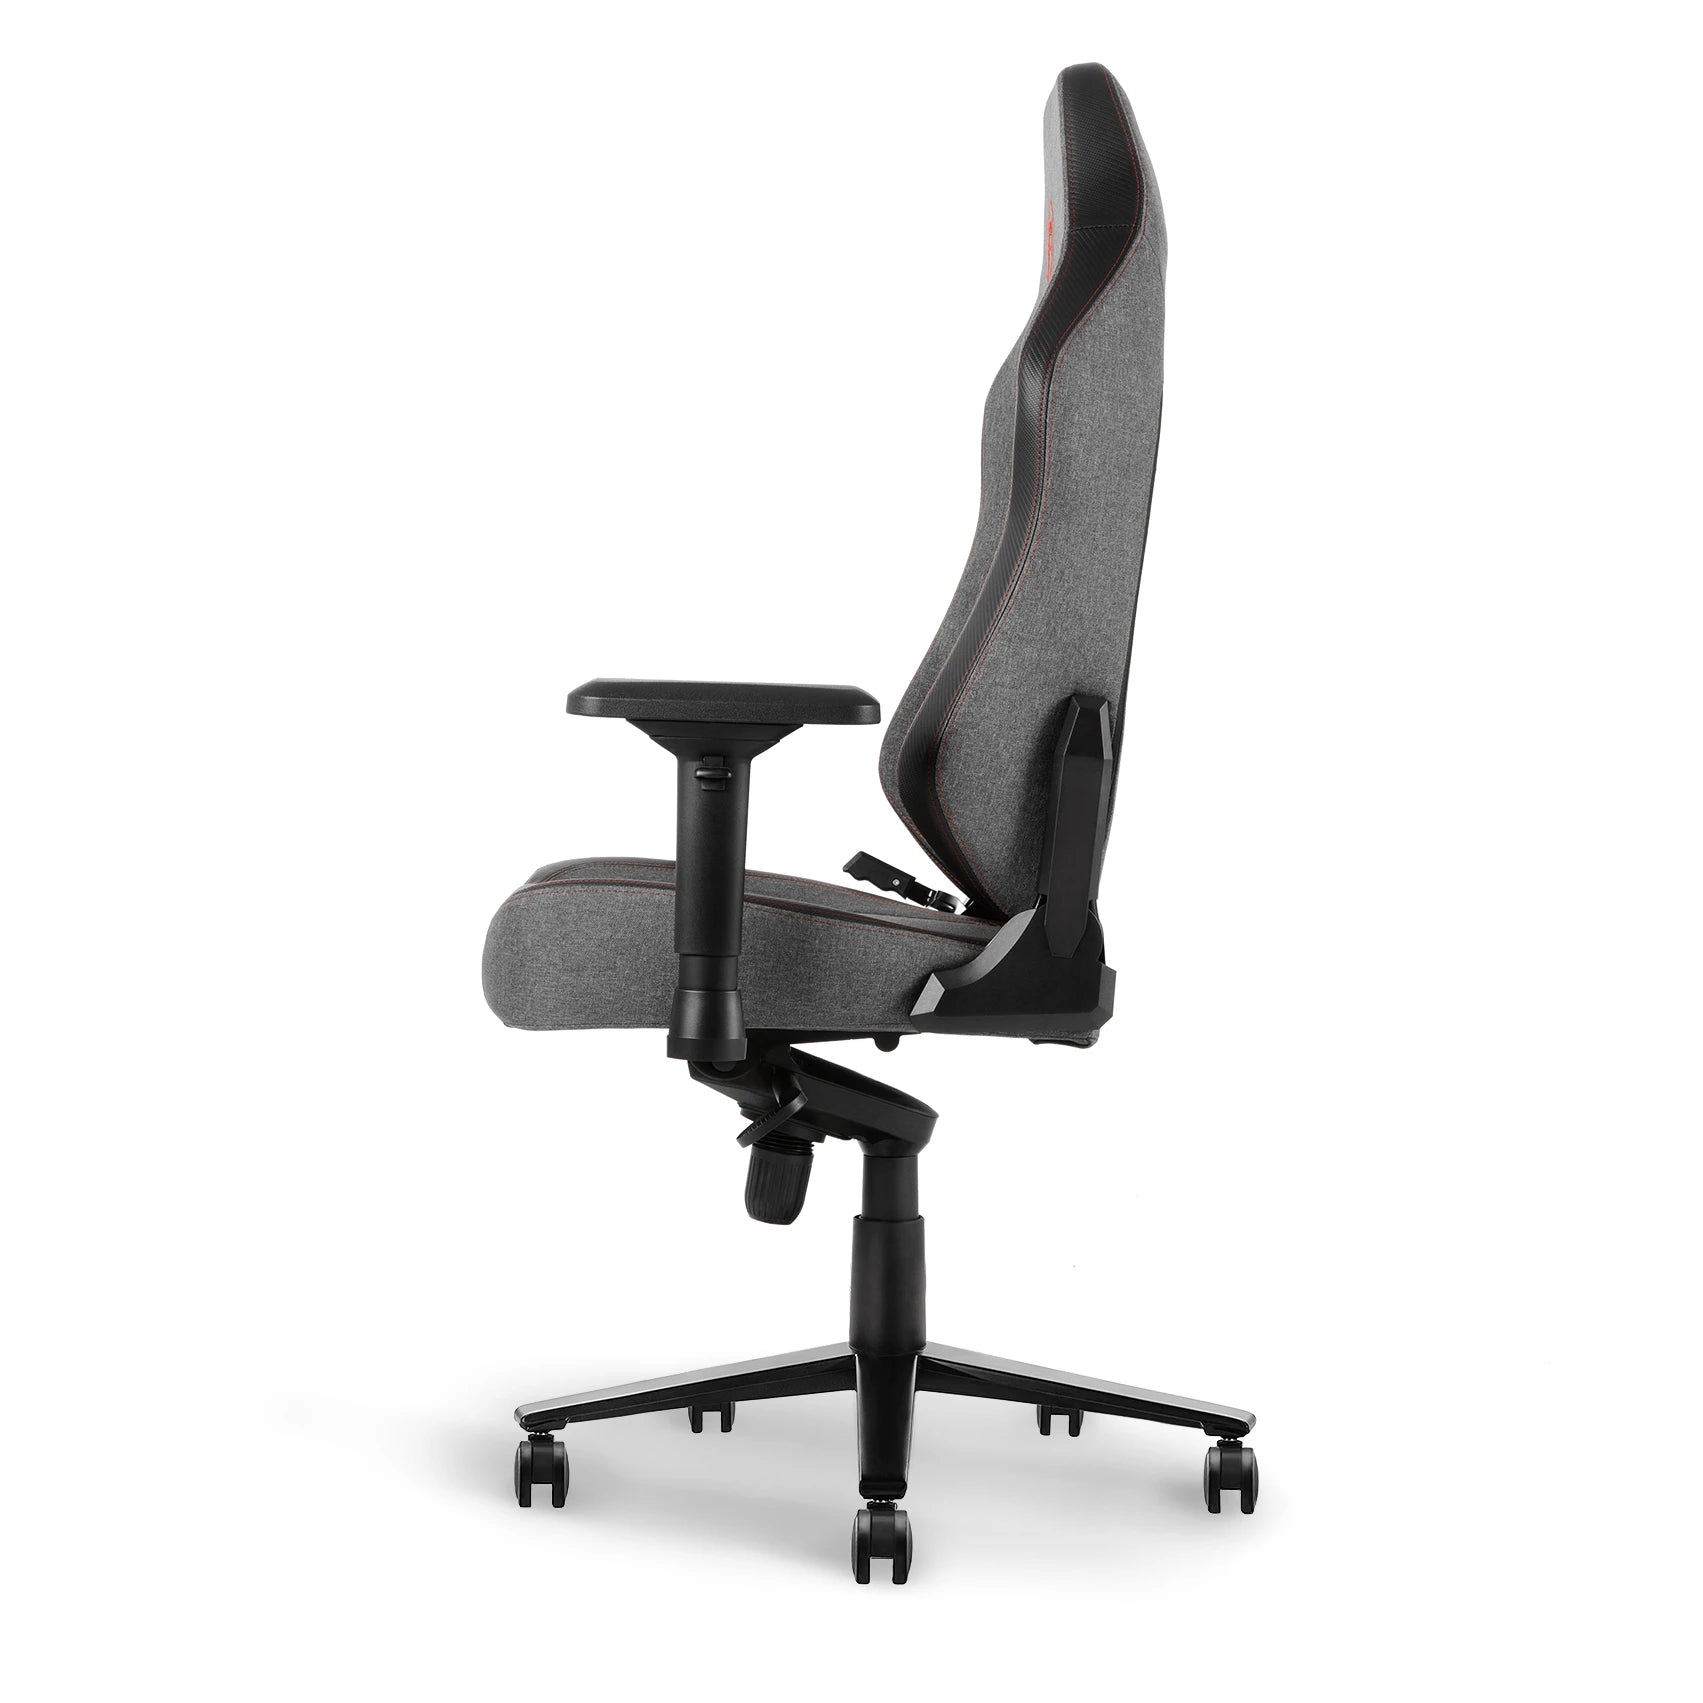 Heather grey gaming chair side angle showcasing sleek lines and modern design.